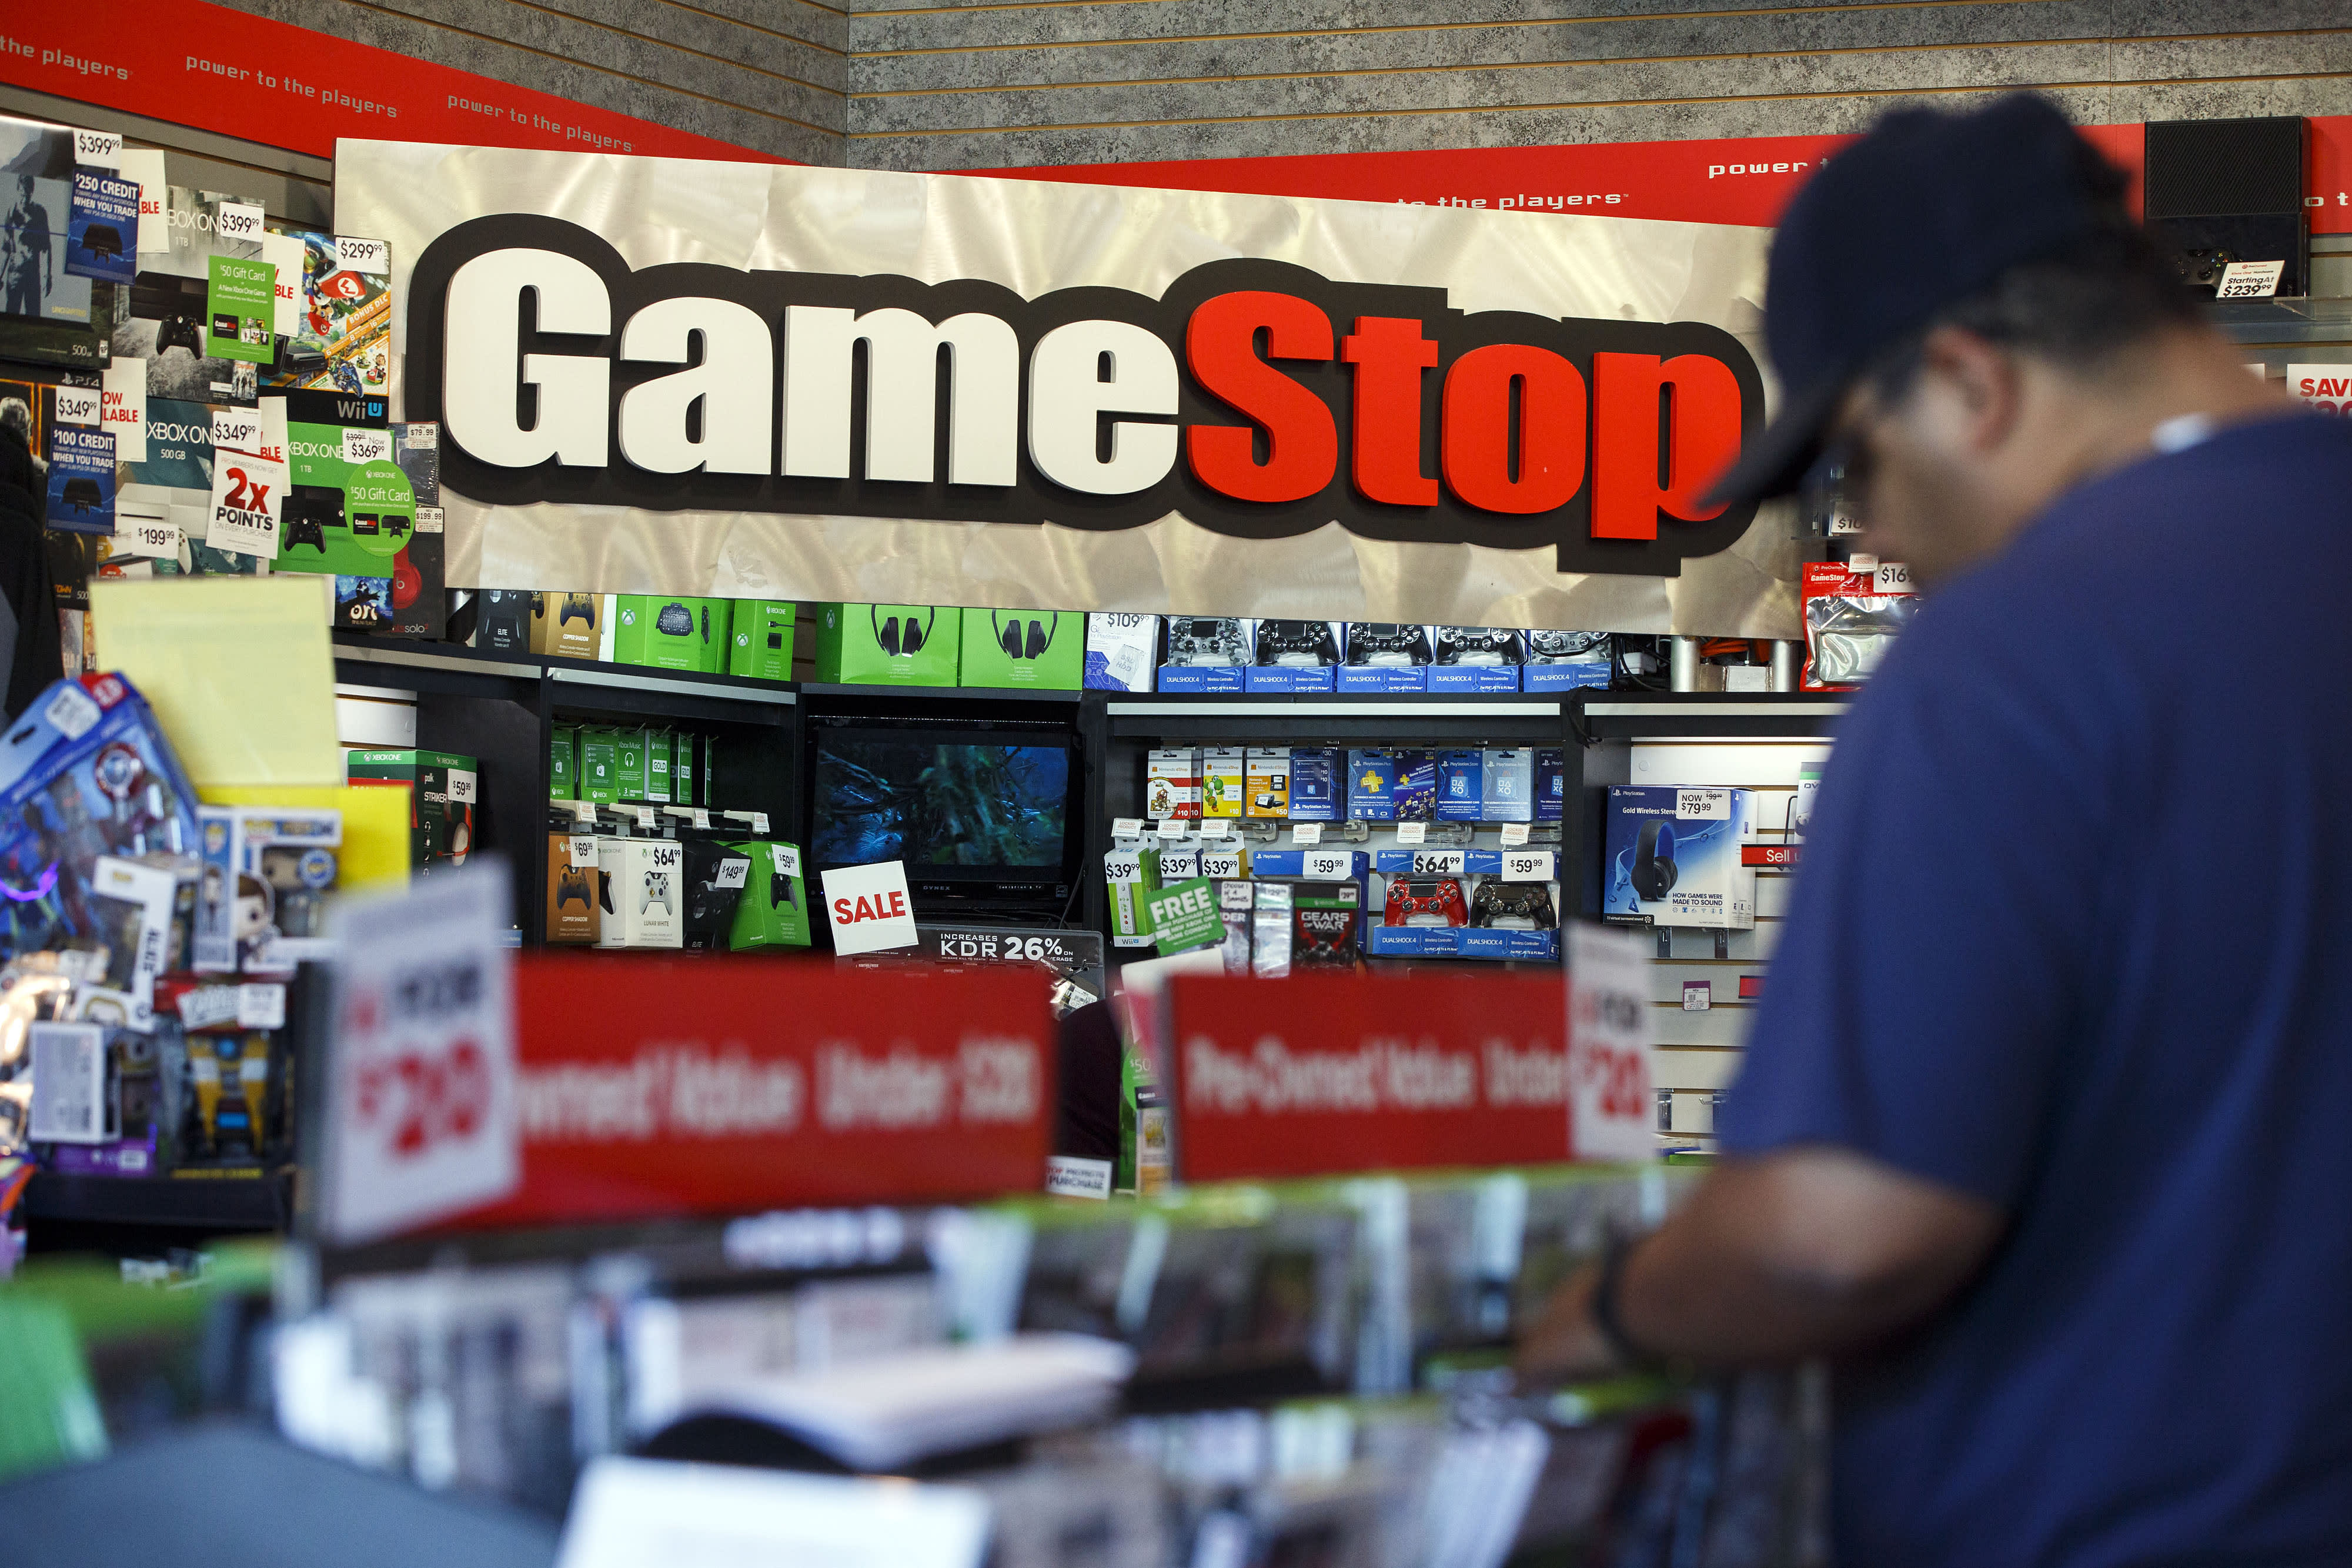 GameStop jumps 100% more, even with hedge funds covering short bets, the scrutiny of recovery intensifies